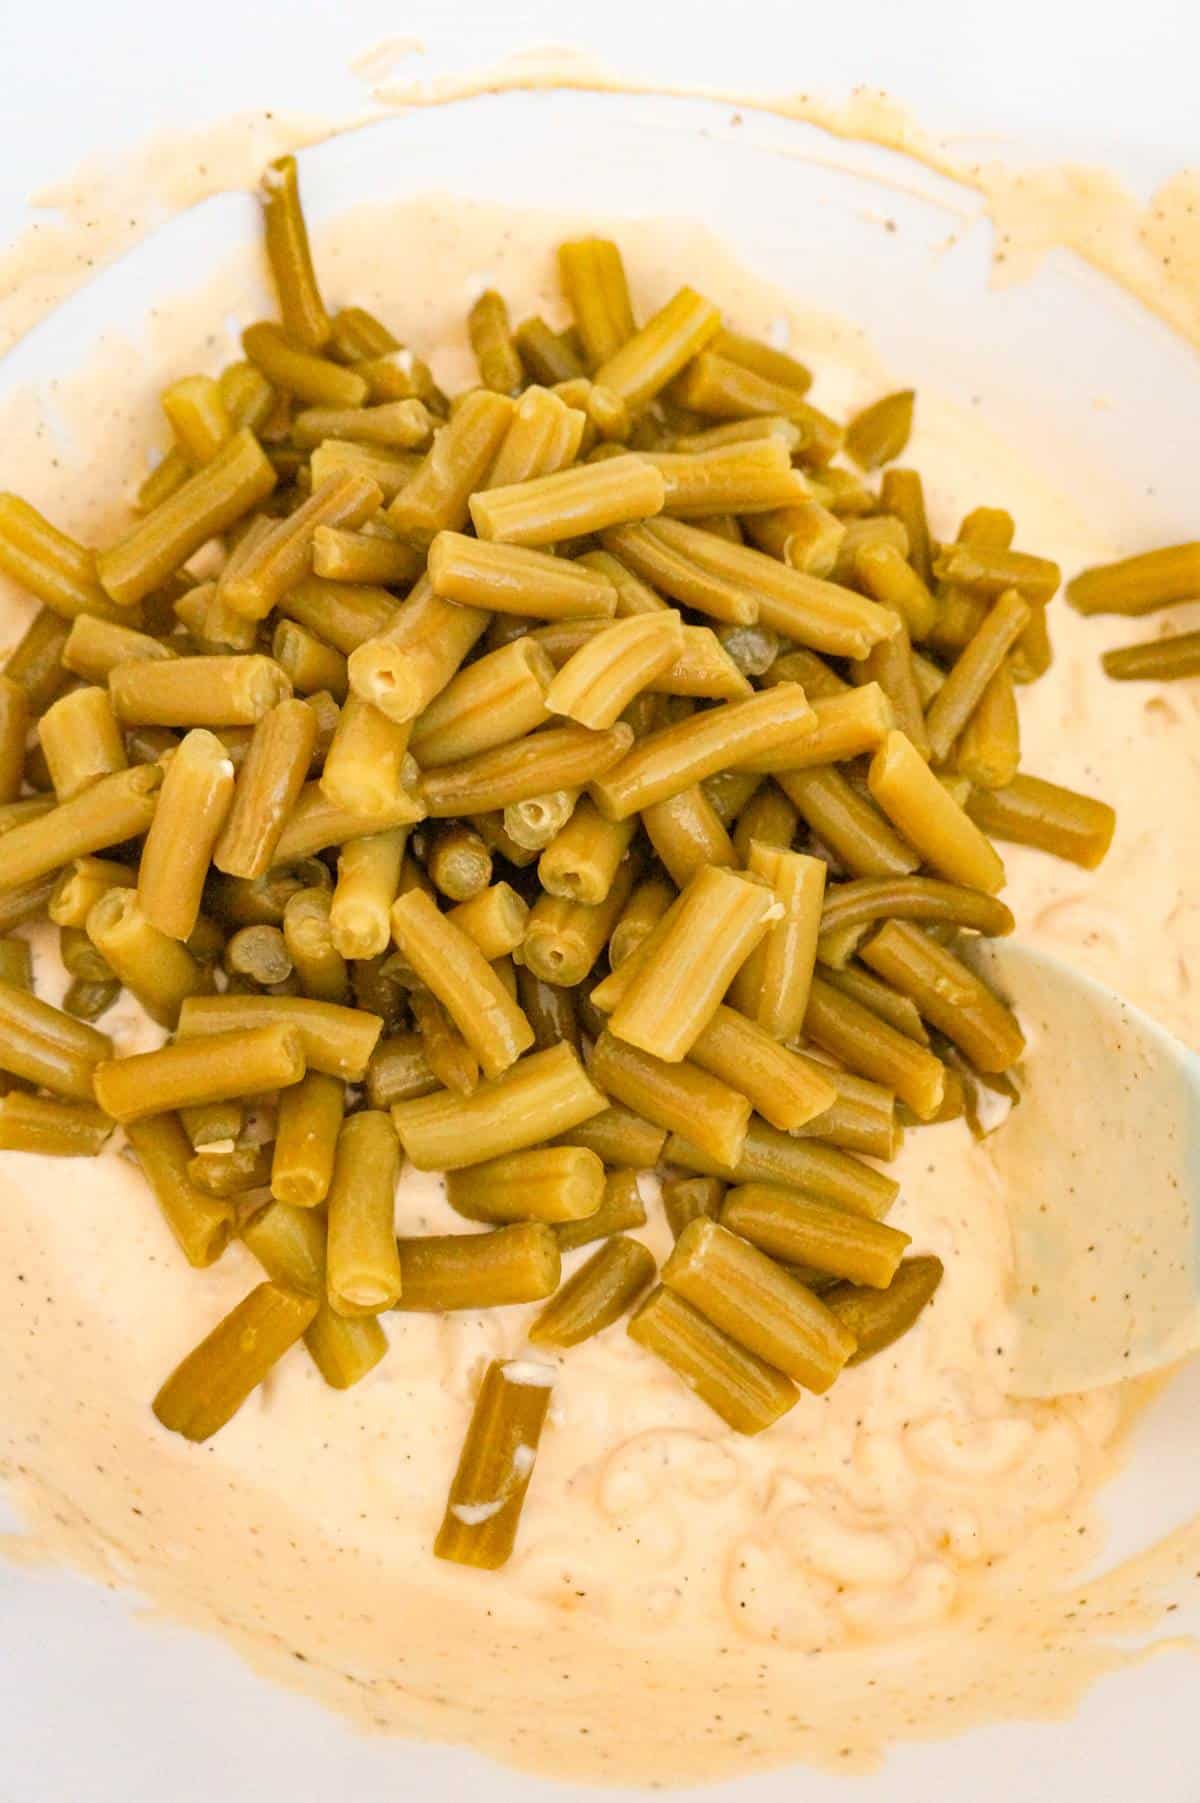 cut green beans on top of cream macaroni mixture in a mixing bowl